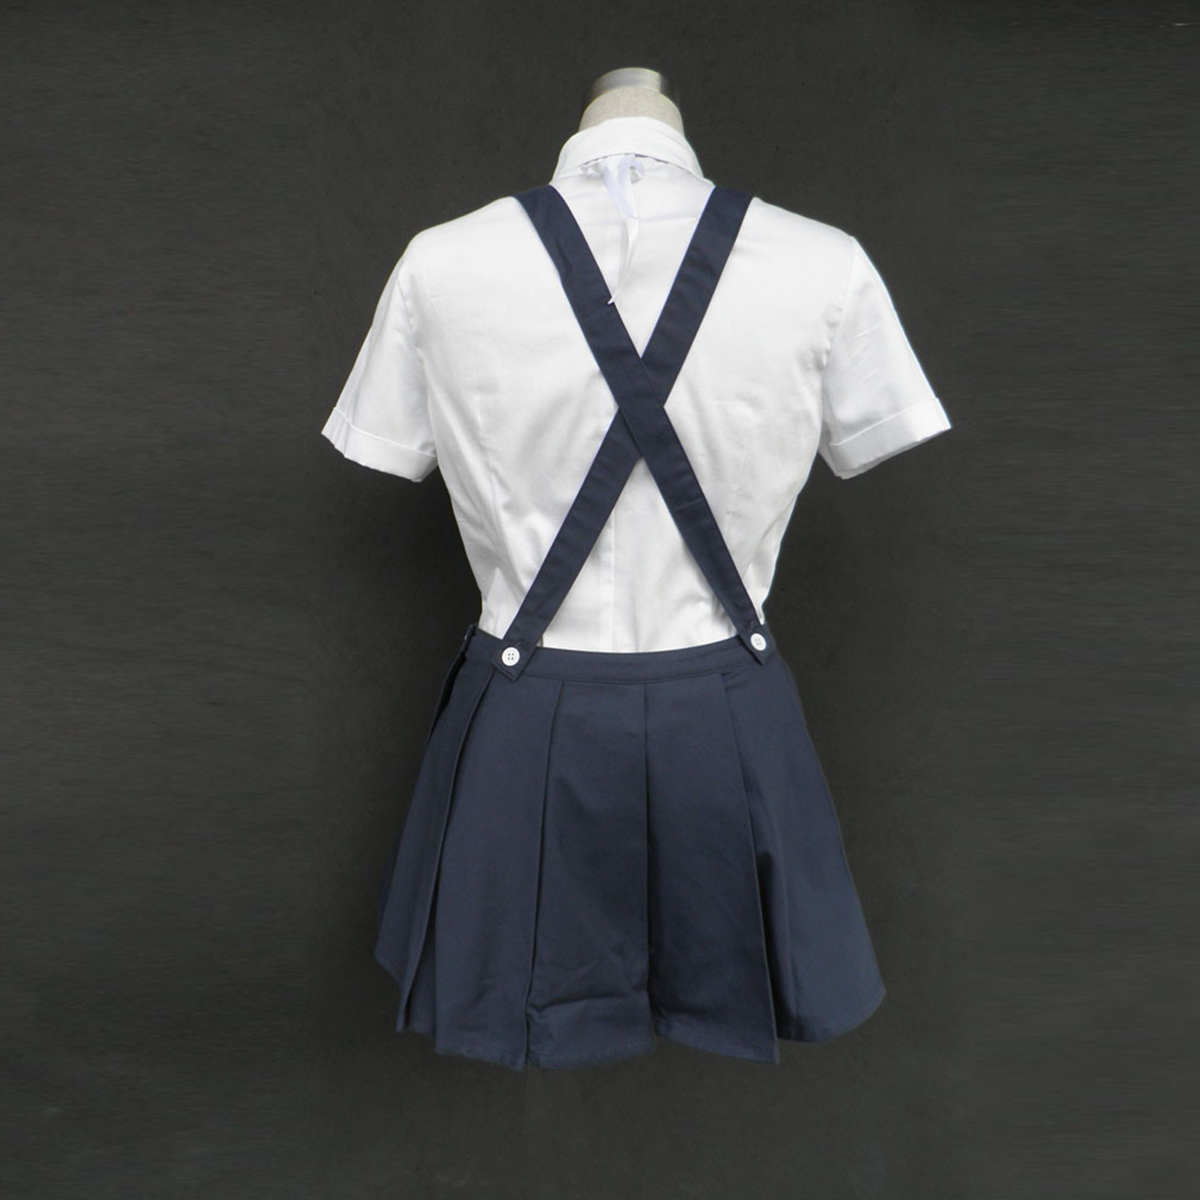 Higurashi When They Cry Furude Rika 1 Anime Cosplay Costumes Outfit